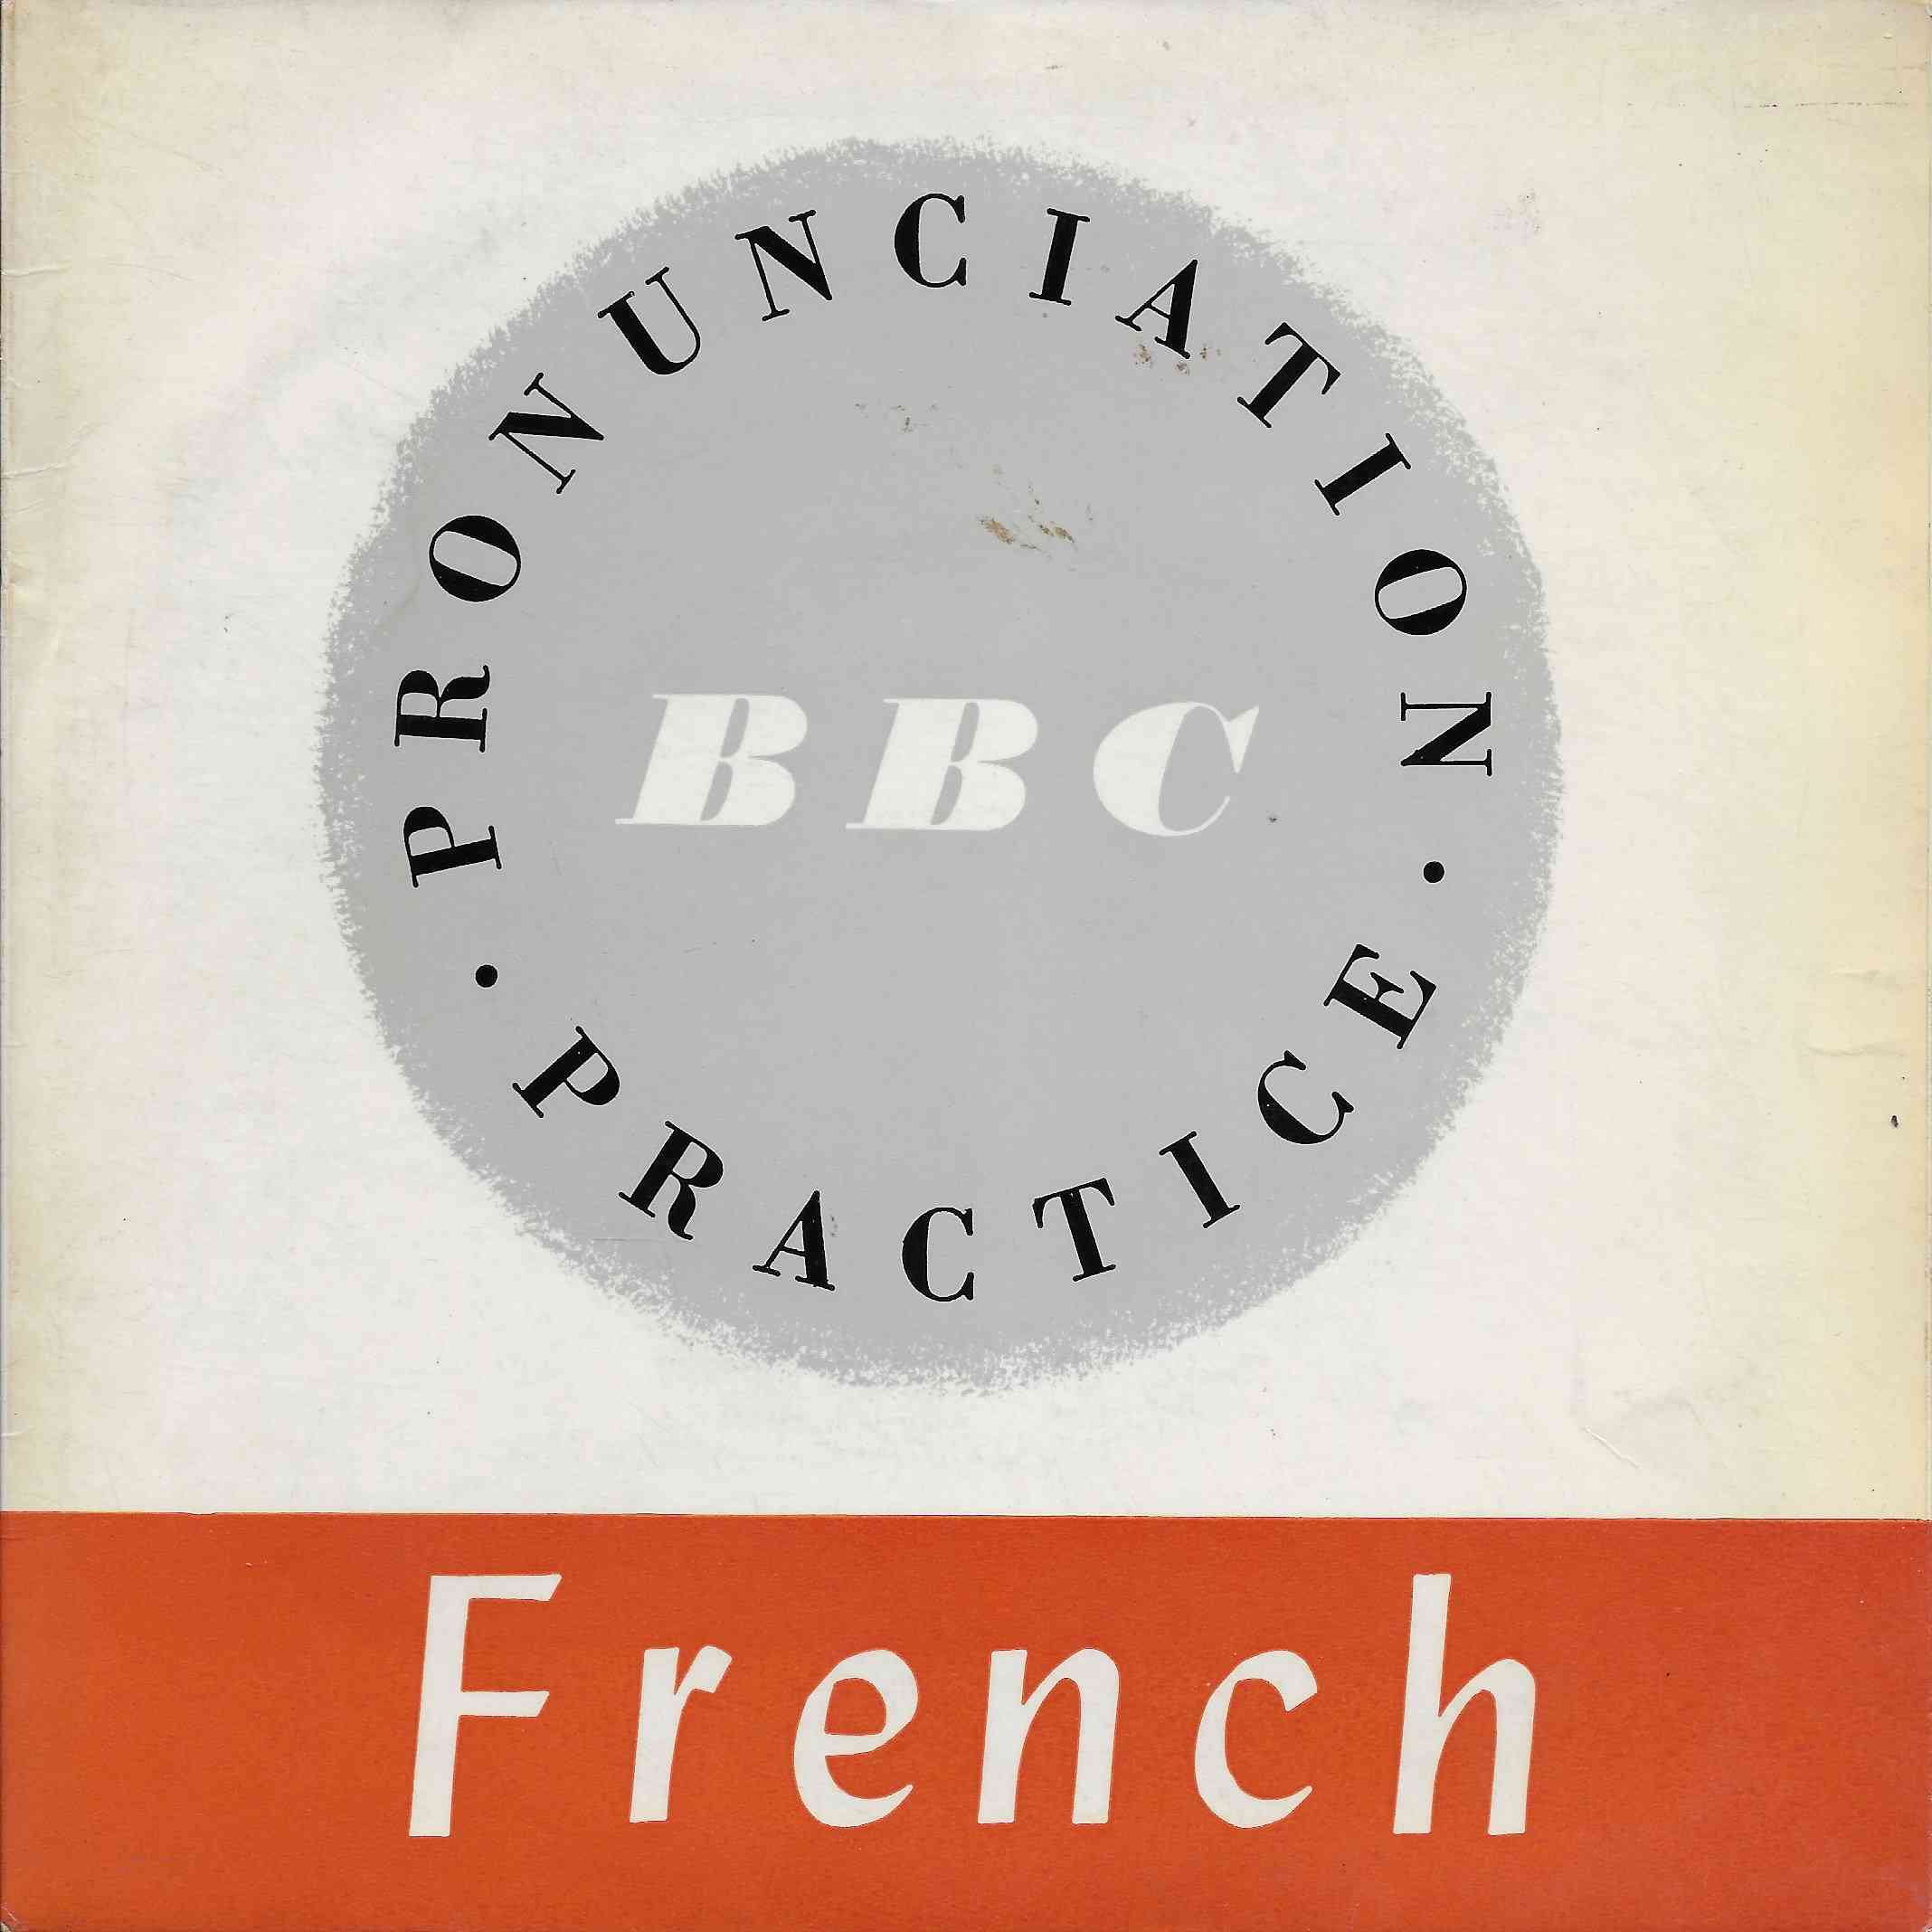 Picture of FRE-A-1 French by artist Elsie Ferguson from the BBC singles - Records and Tapes library